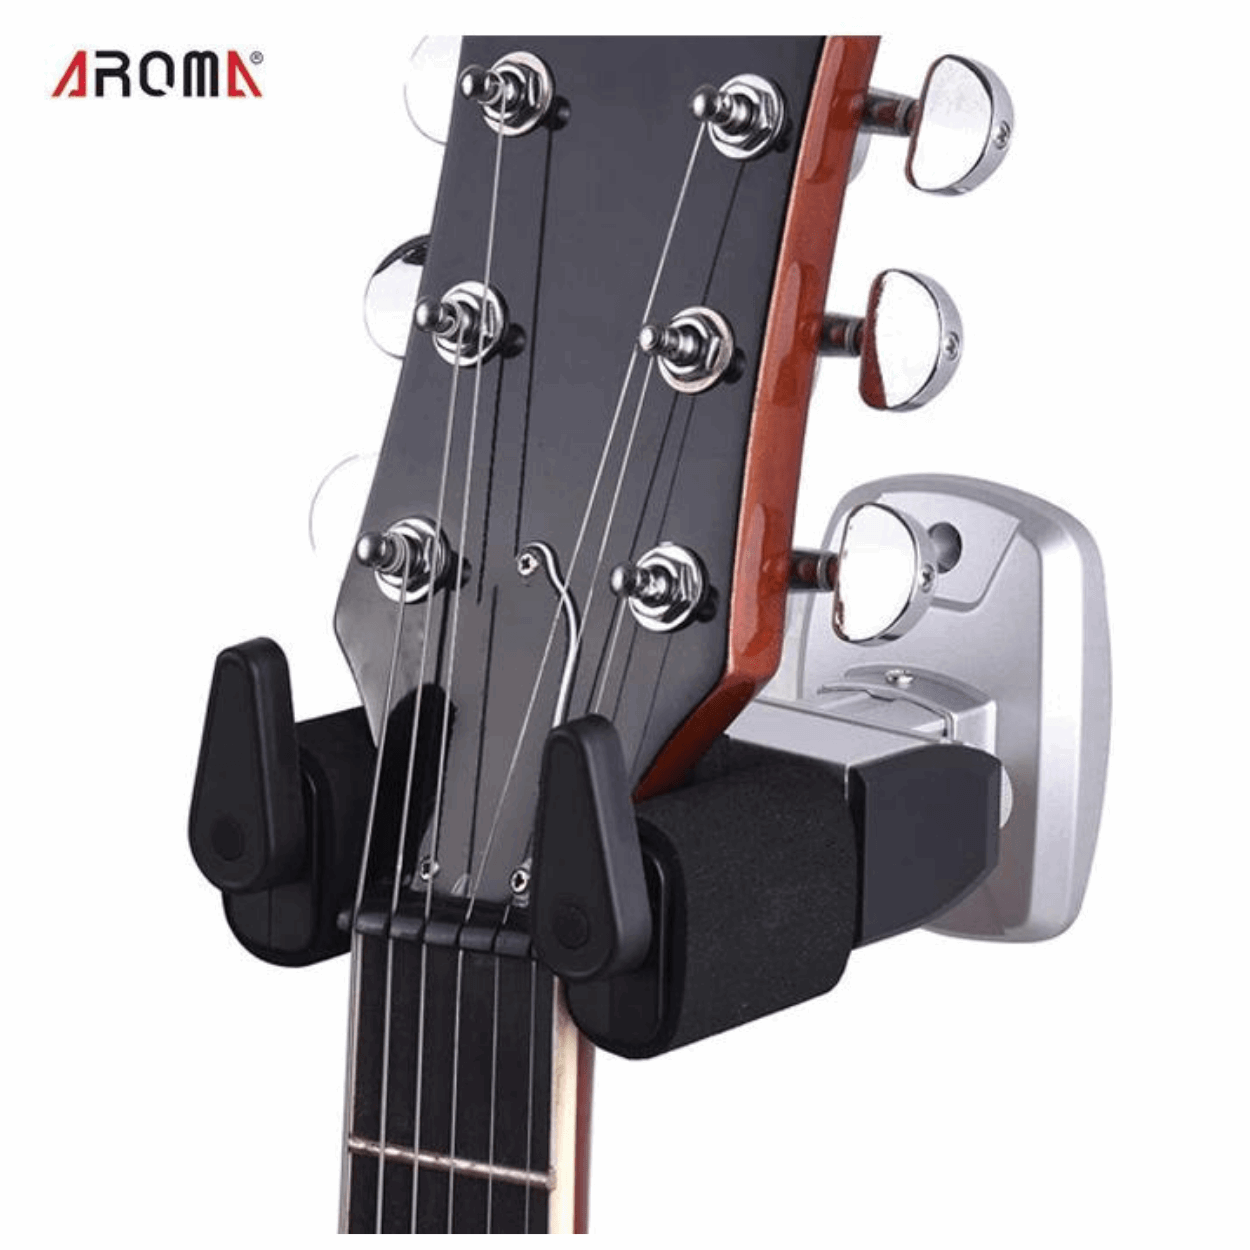 Aroma AH-81 Guitar Holder Auto Lock For Acoustic Guitar | AROMA , Zoso Music